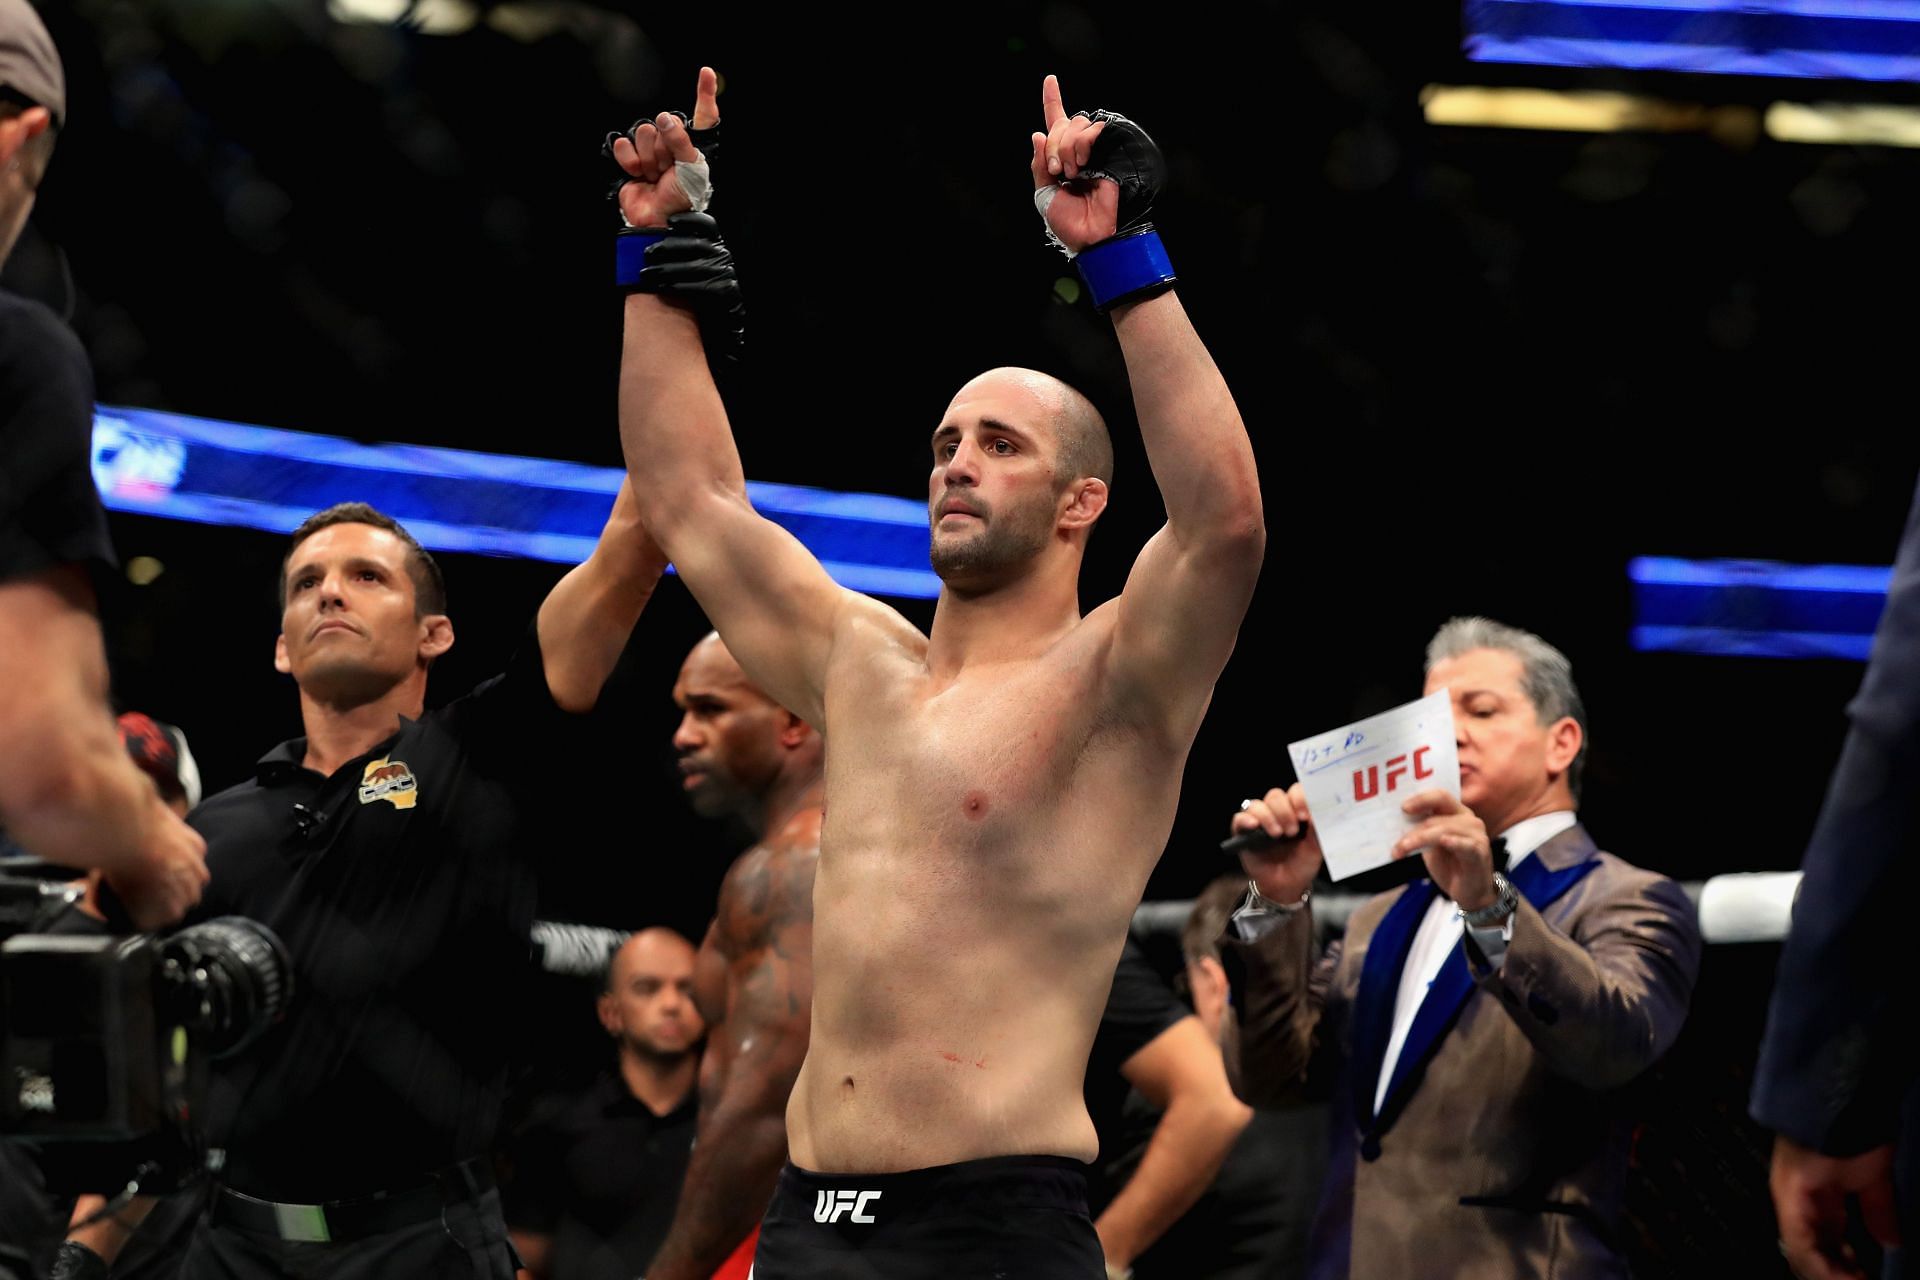 Volkan Oezdemir holds a record of 17-6